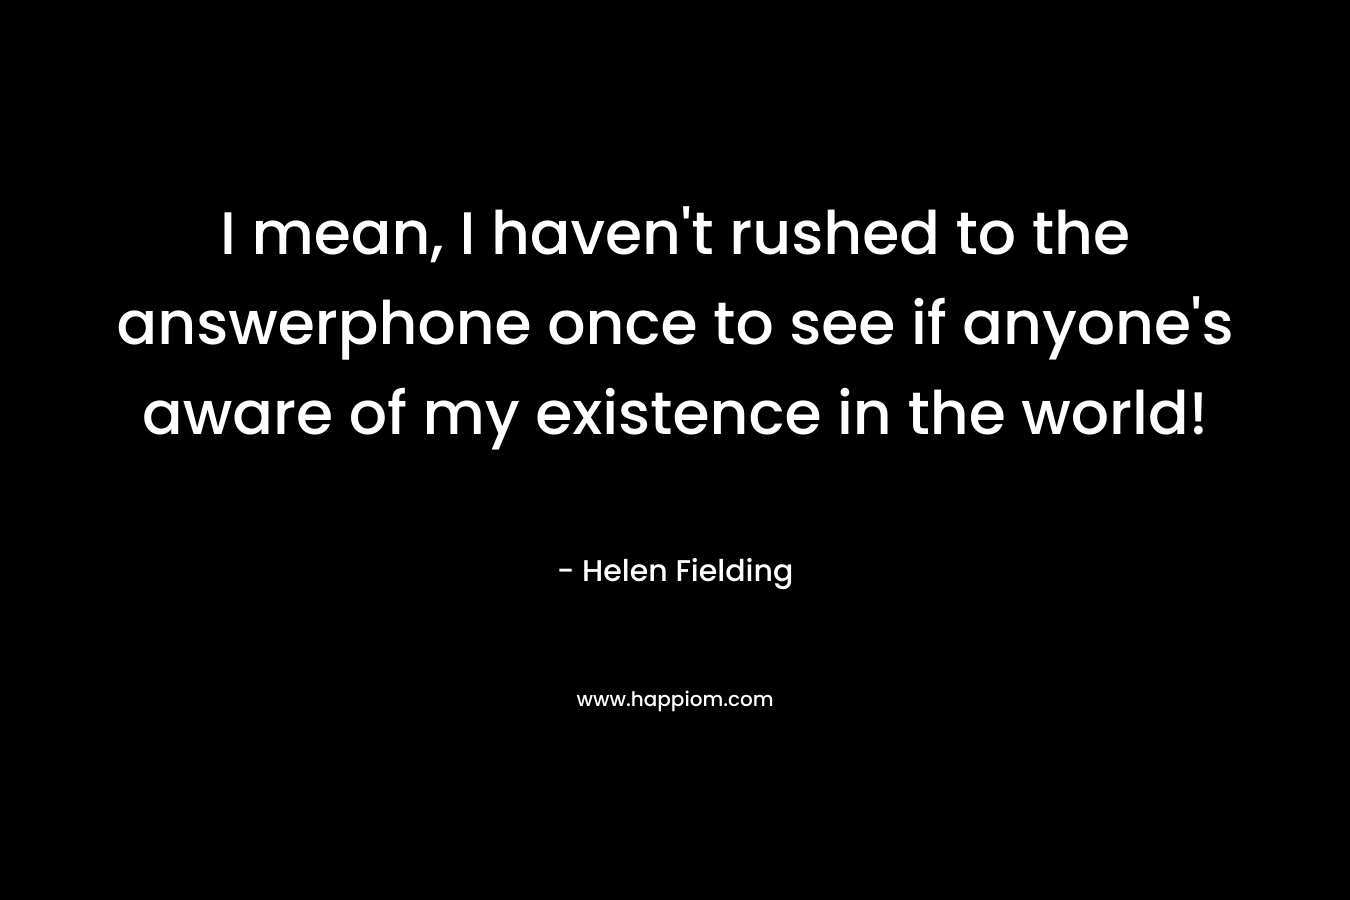 I mean, I haven’t rushed to the answerphone once to see if anyone’s aware of my existence in the world! – Helen Fielding